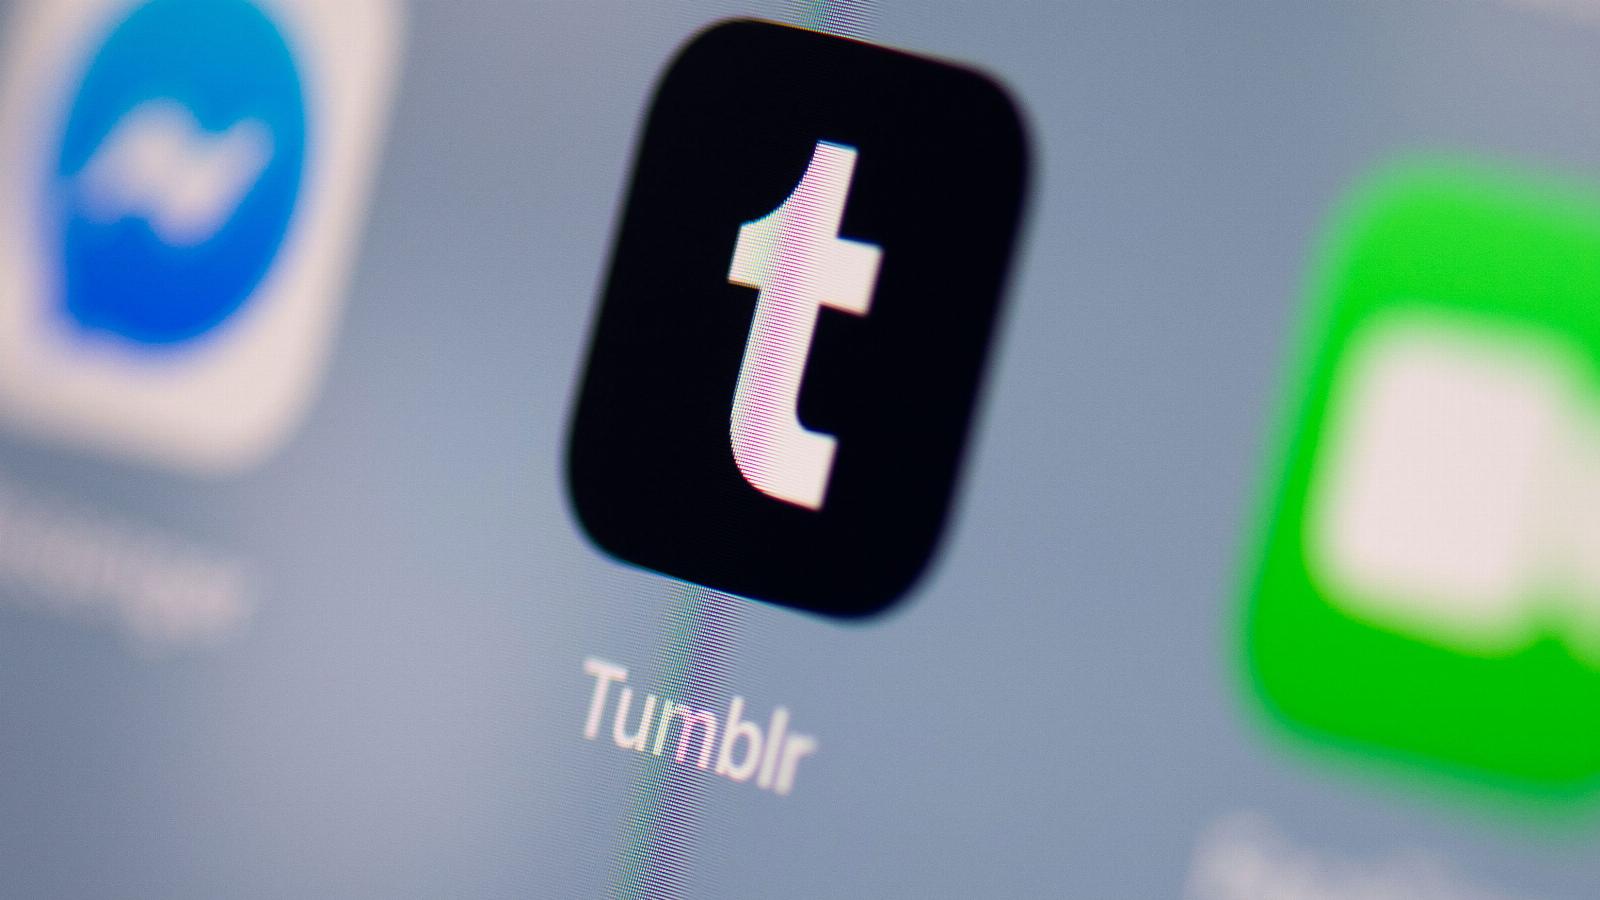 Tumblr tests ‘Communities,’ semi-private groups with their own moderators and feeds